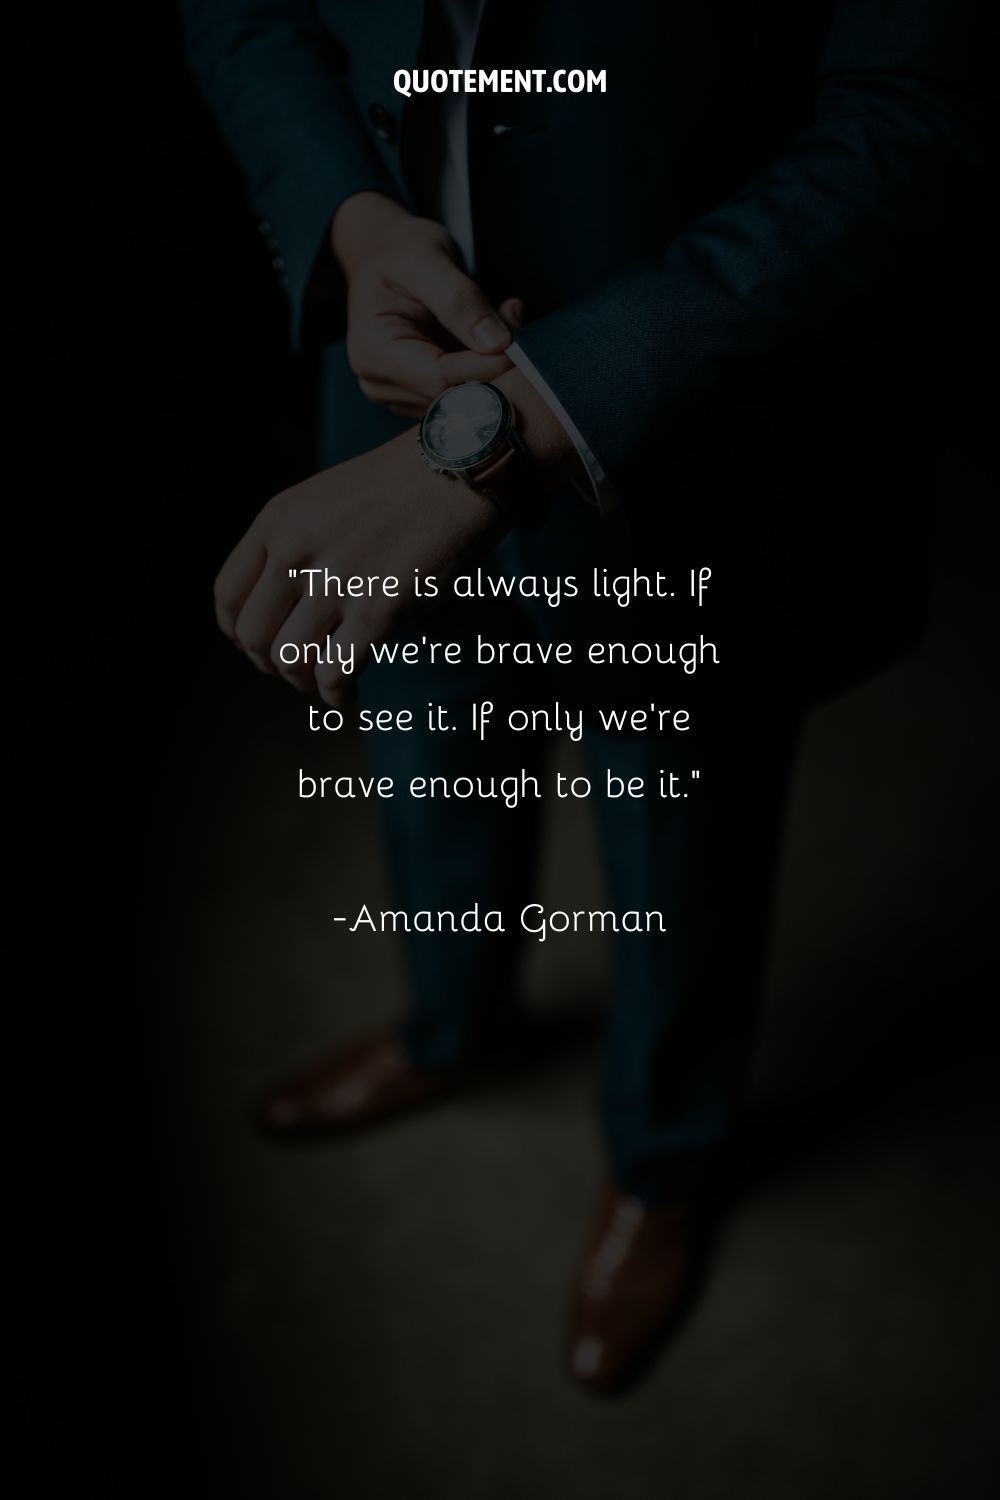 man in a suit holding a watch representing light quote